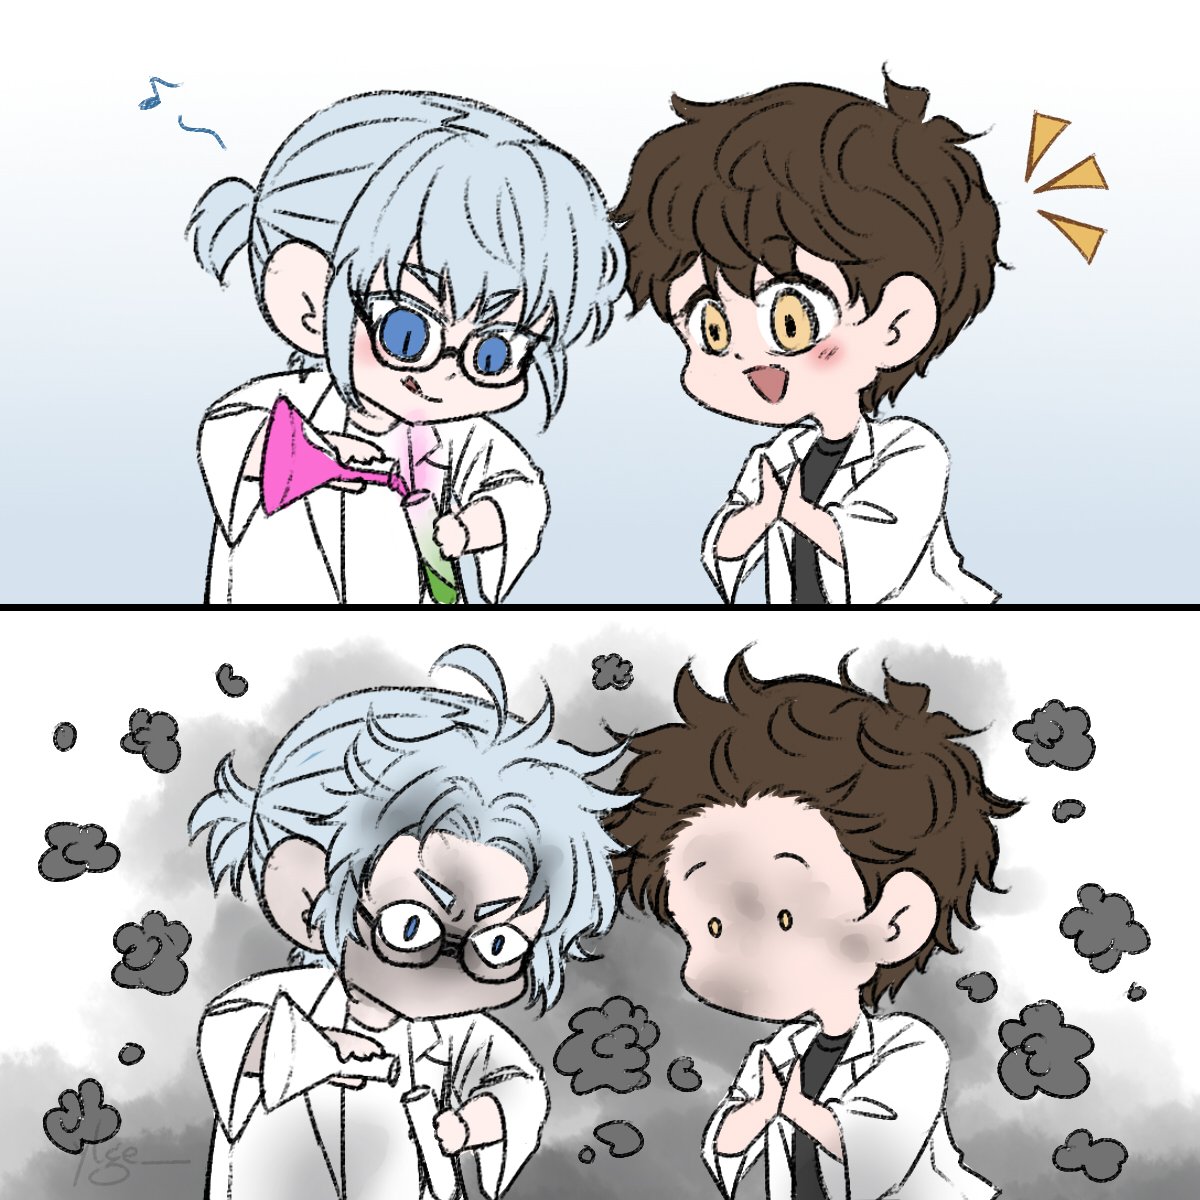 Mad scientist and his assistant 👨‍🔬
#khunbam 